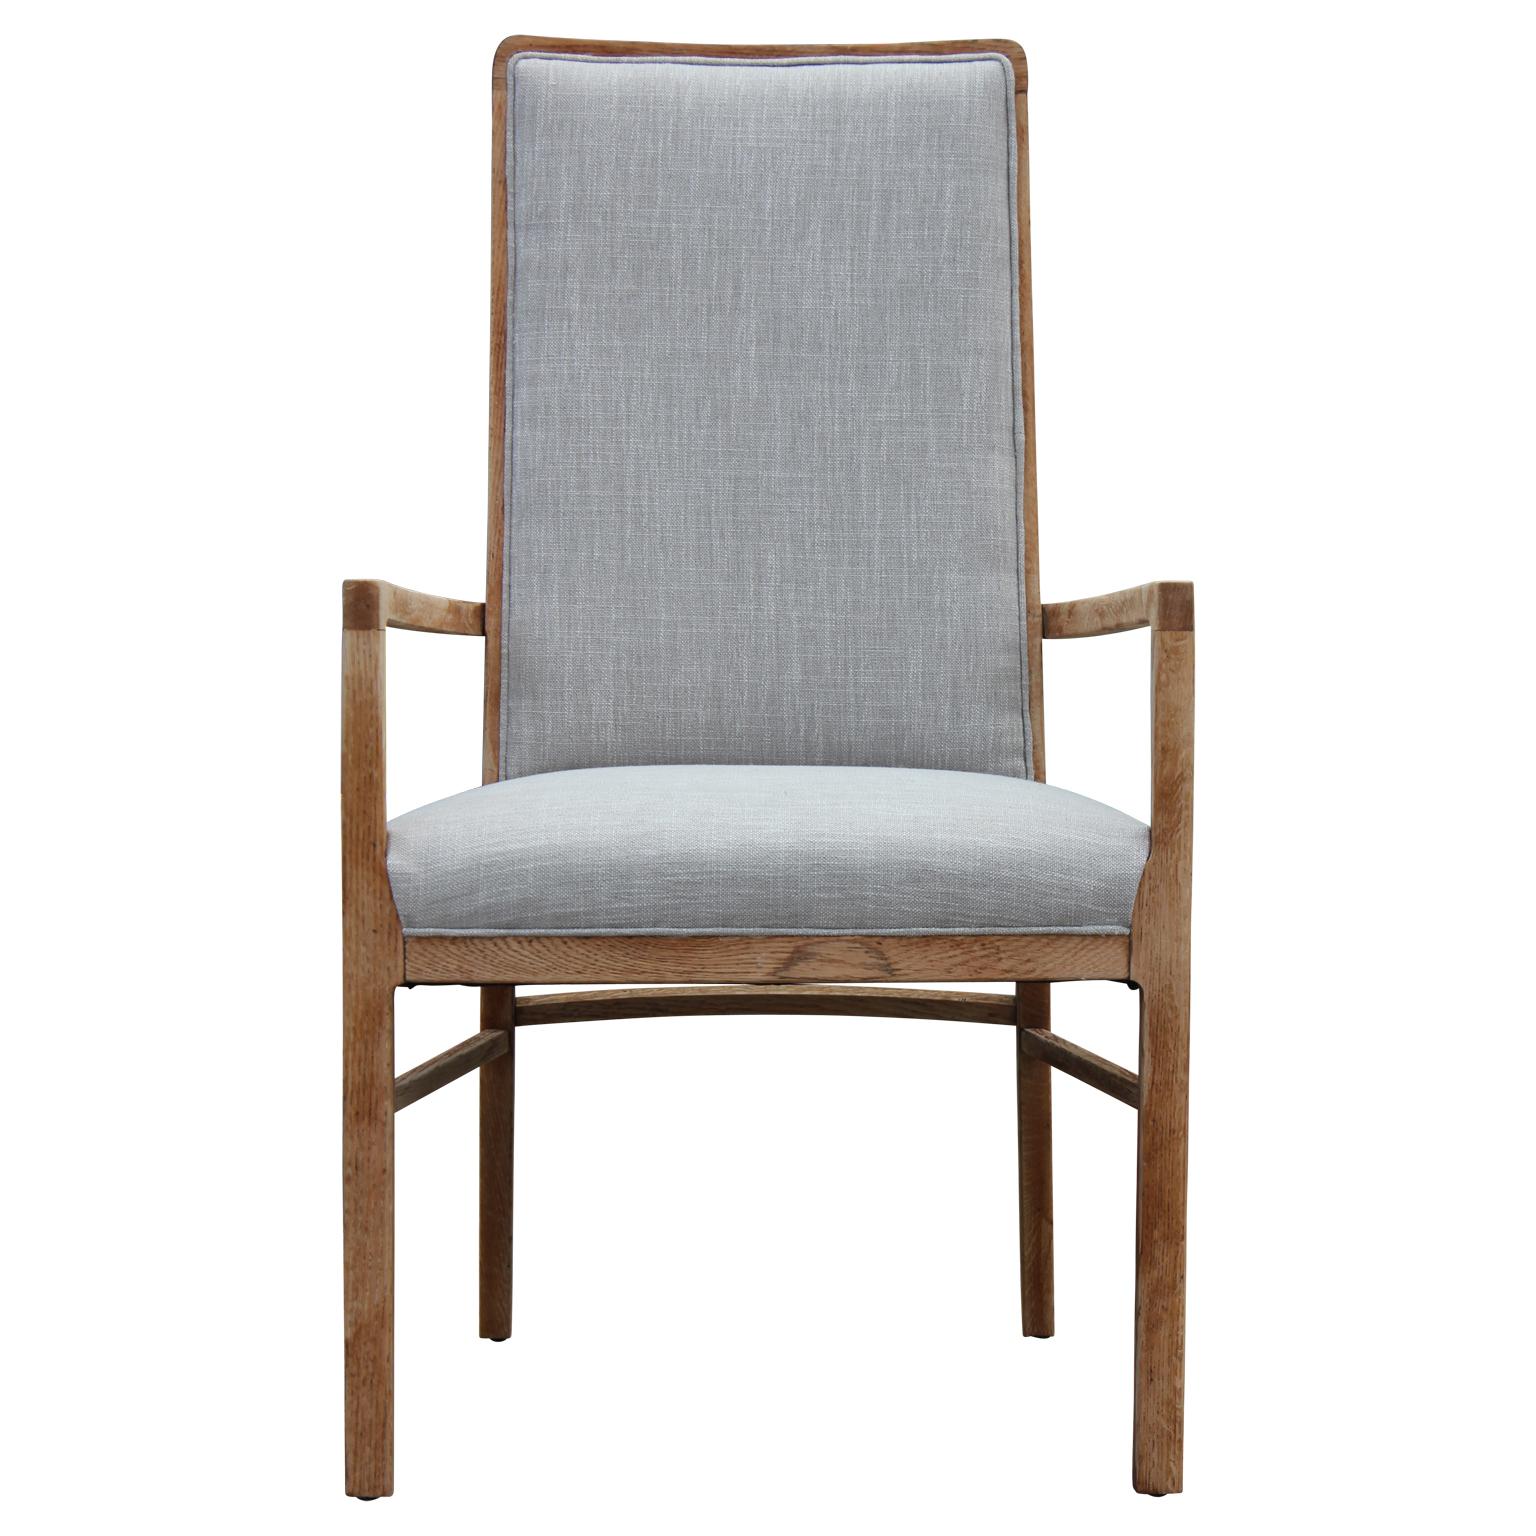 Set of six modern grey linen dining chairs with bleached wood chairs. Set comes with two chairs with arms, four chairs without arms.

Additional dimensions for two chairs with arms:
Width 22in
Depth 21.5in
Height 40in
Seat height 18in.